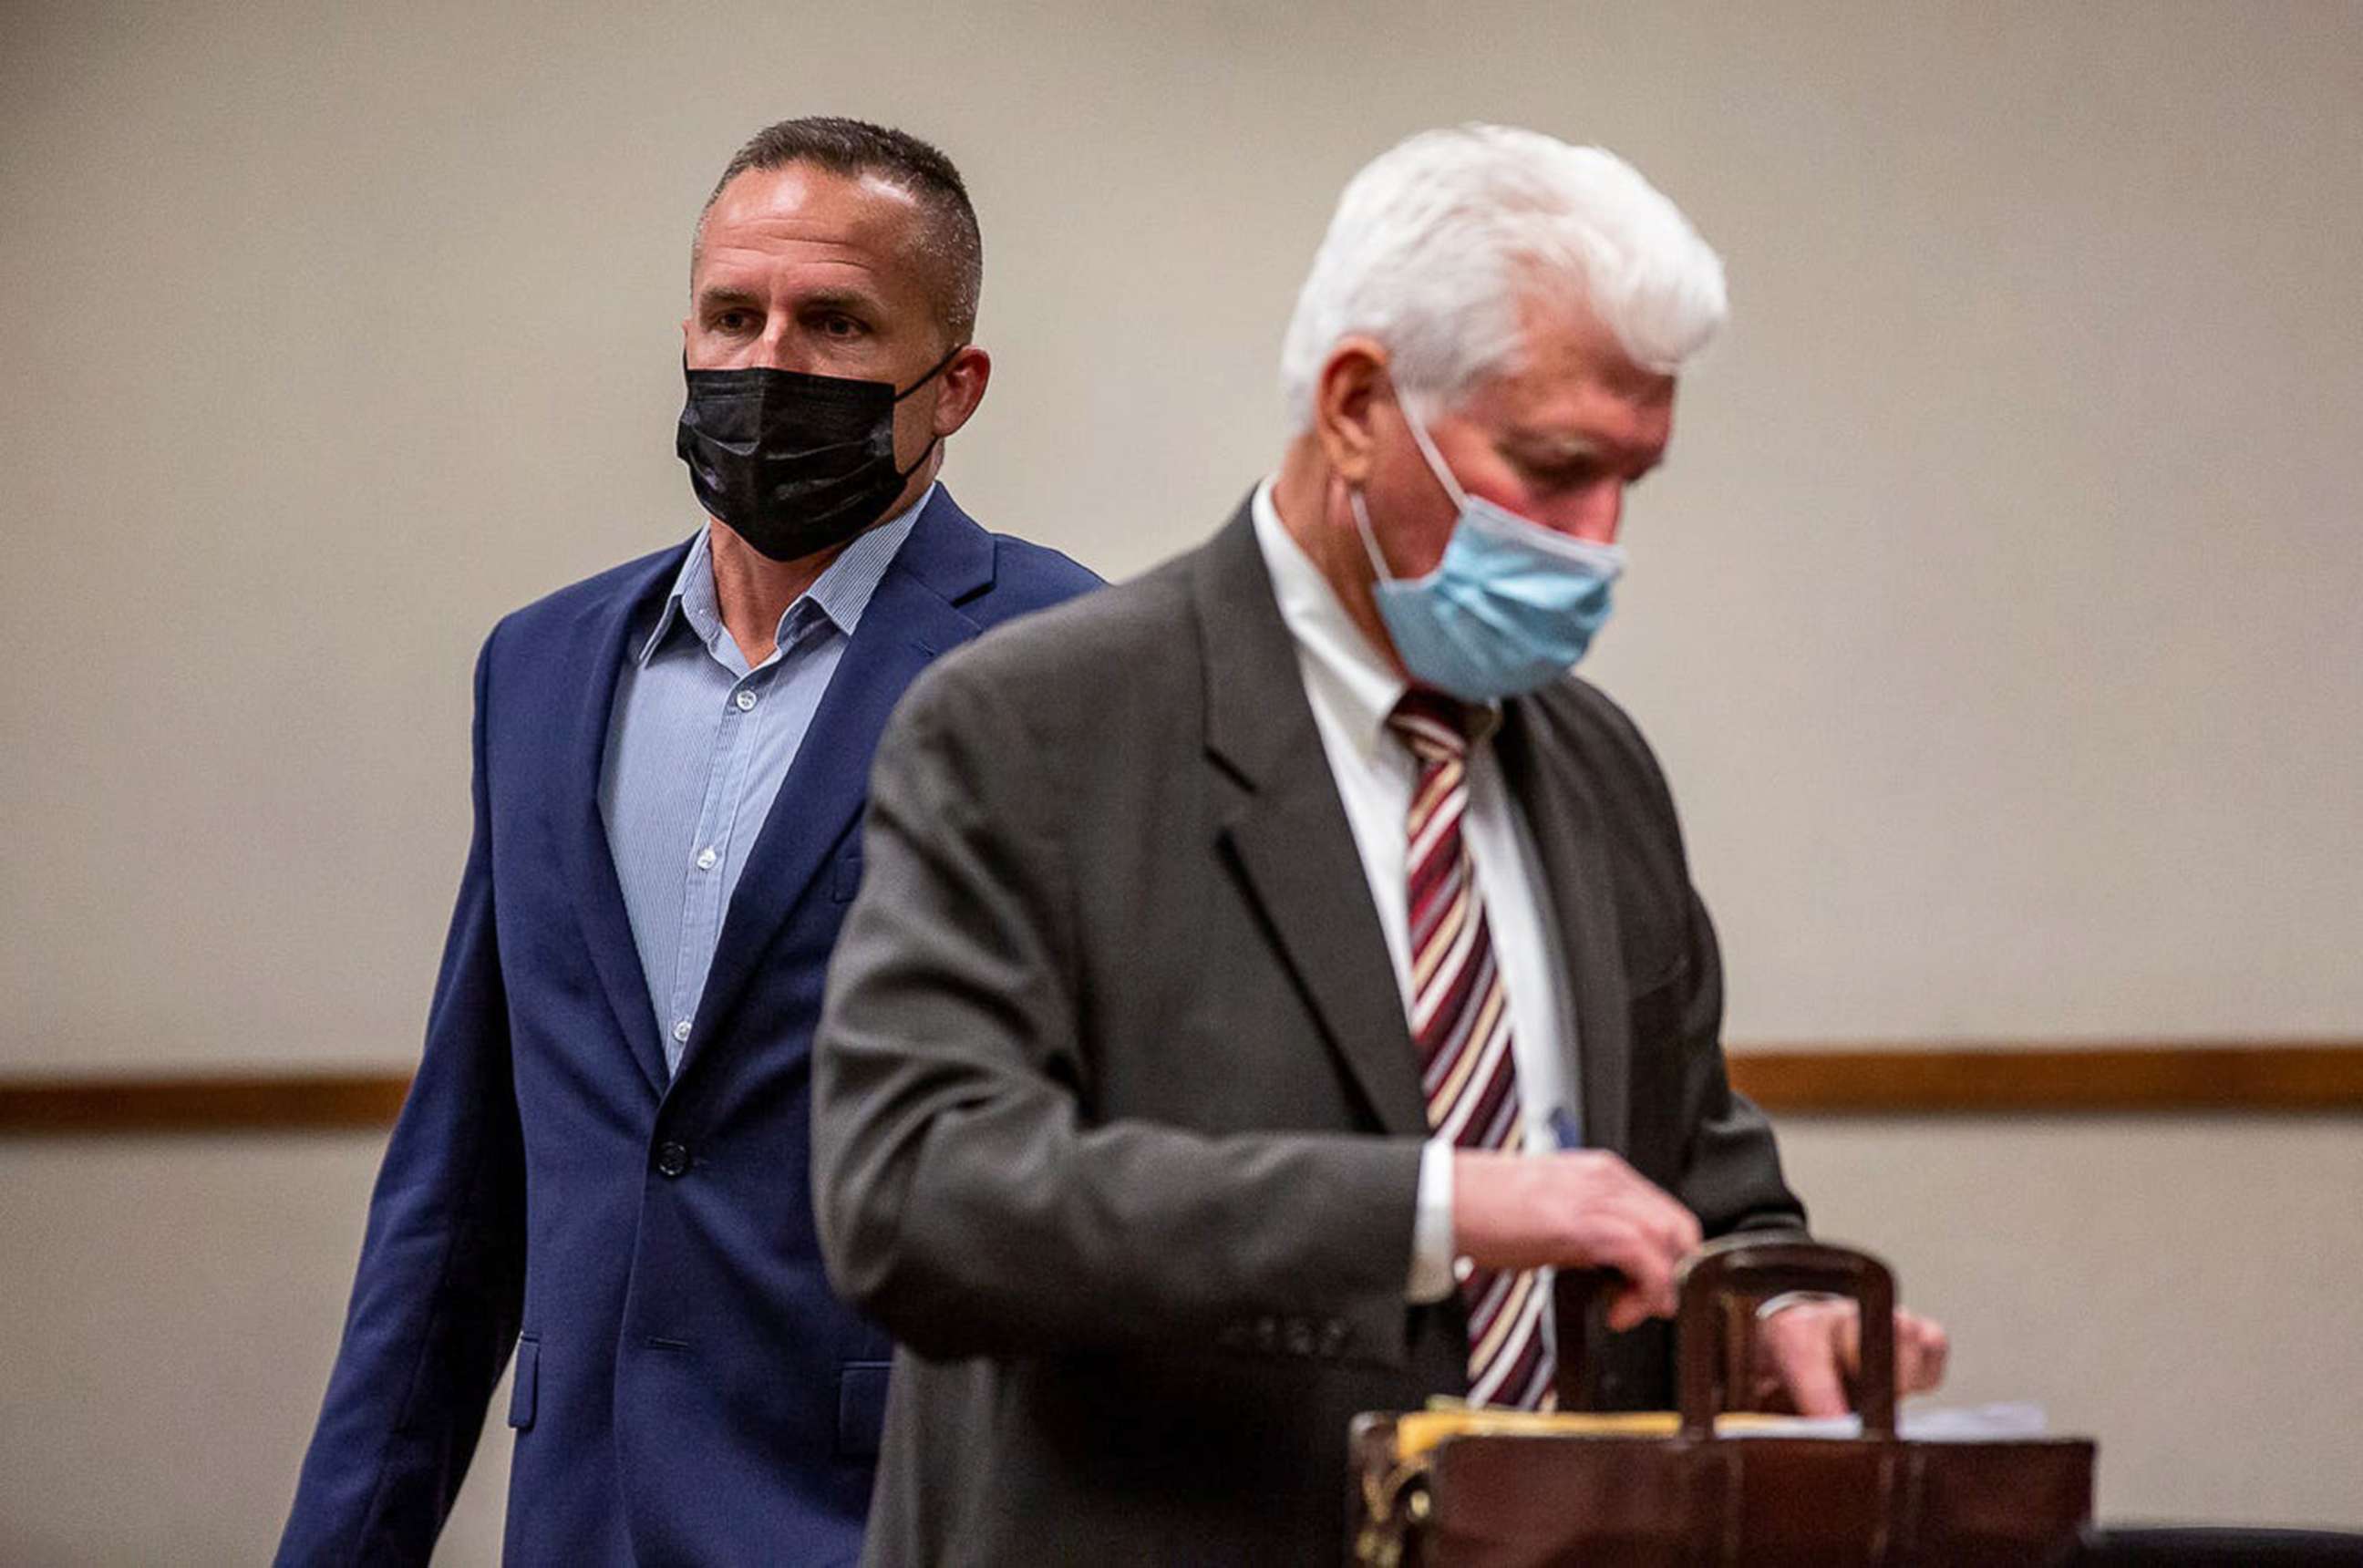 PHOTO: Former Louisville Metro Police detective Brett Hankison, left, arrives in the courtroom with his attorney Stew Mathews for a pre-trial conference on Friday, where Circuit Judge Ann Bailey Smith moved Hankison's trial to Feb. 1, 2022. April 23, 2021